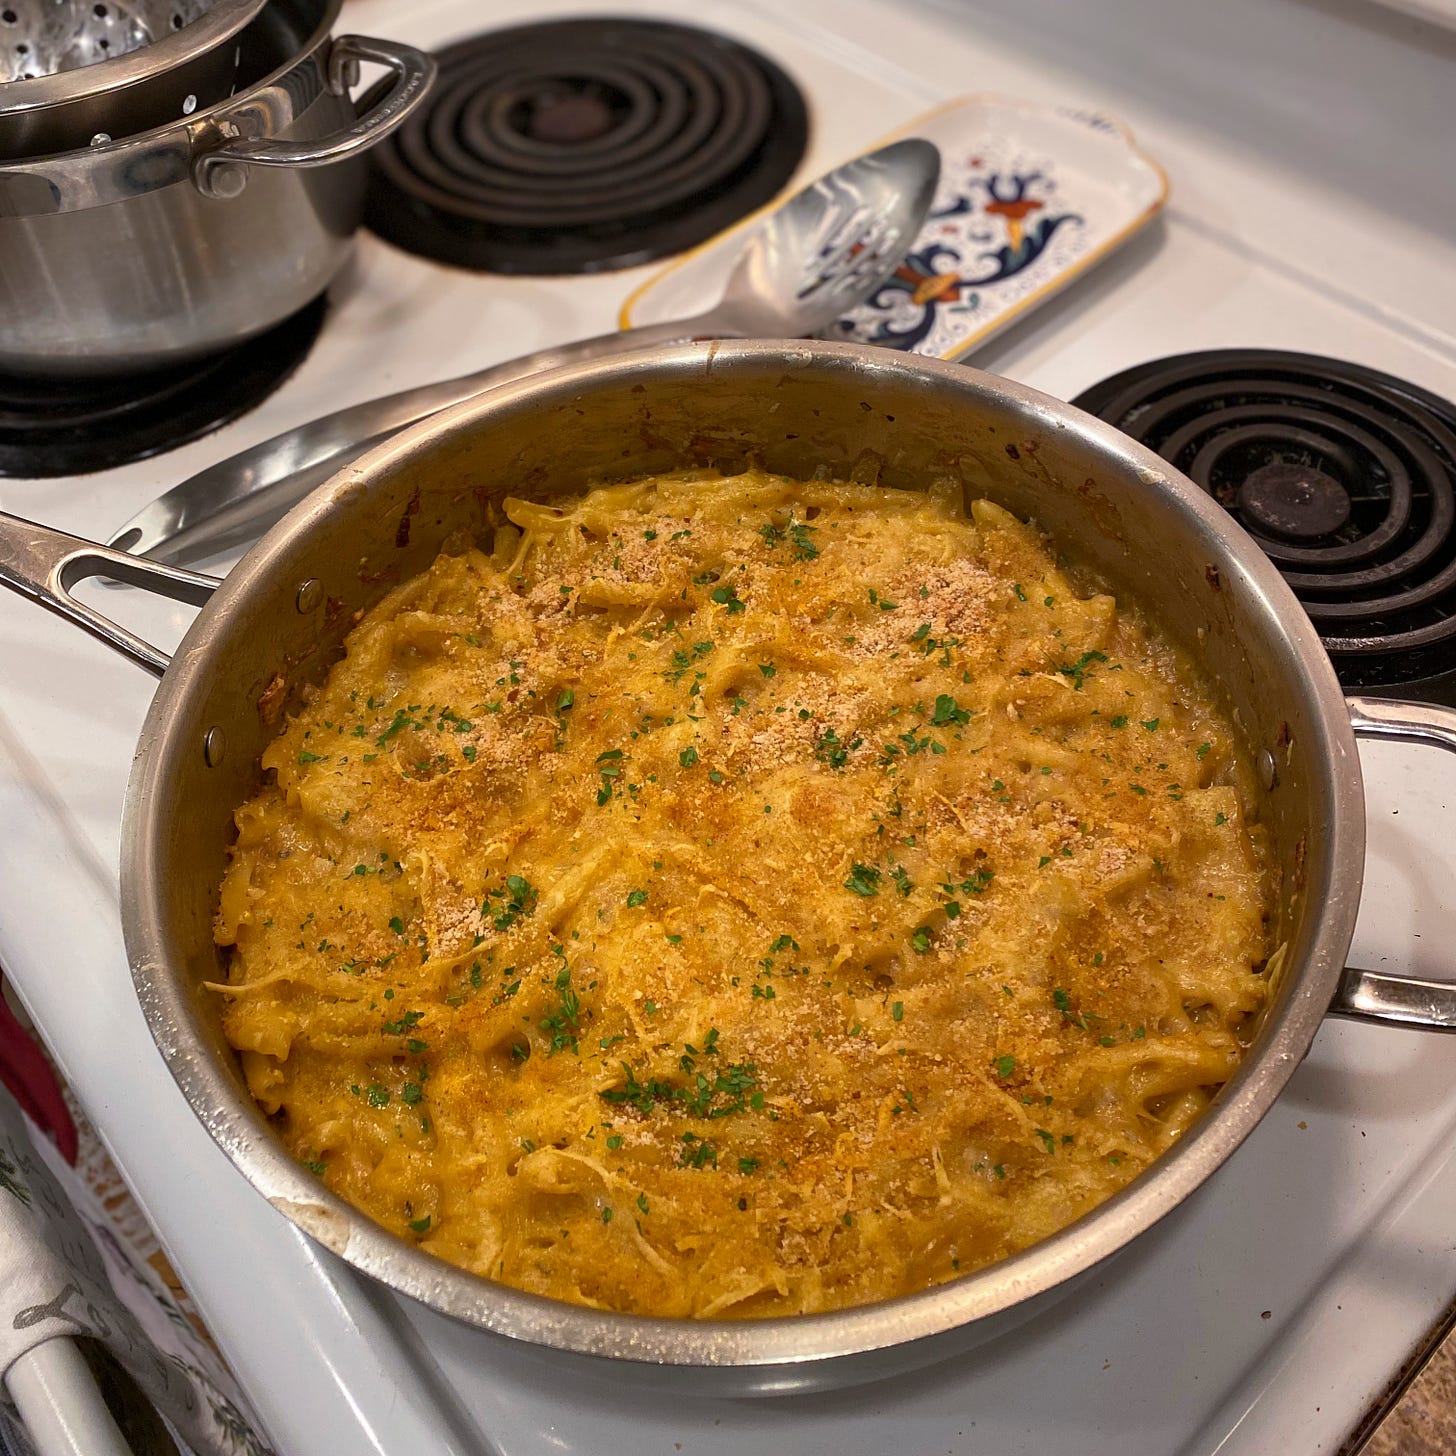 A large steel pan full of the mac & cheese described above, with browned spots of cheese and breadcrumbs on the top, and dusted with parsley. It sits on the stove next to an empty pot and a slotted metal spoon.